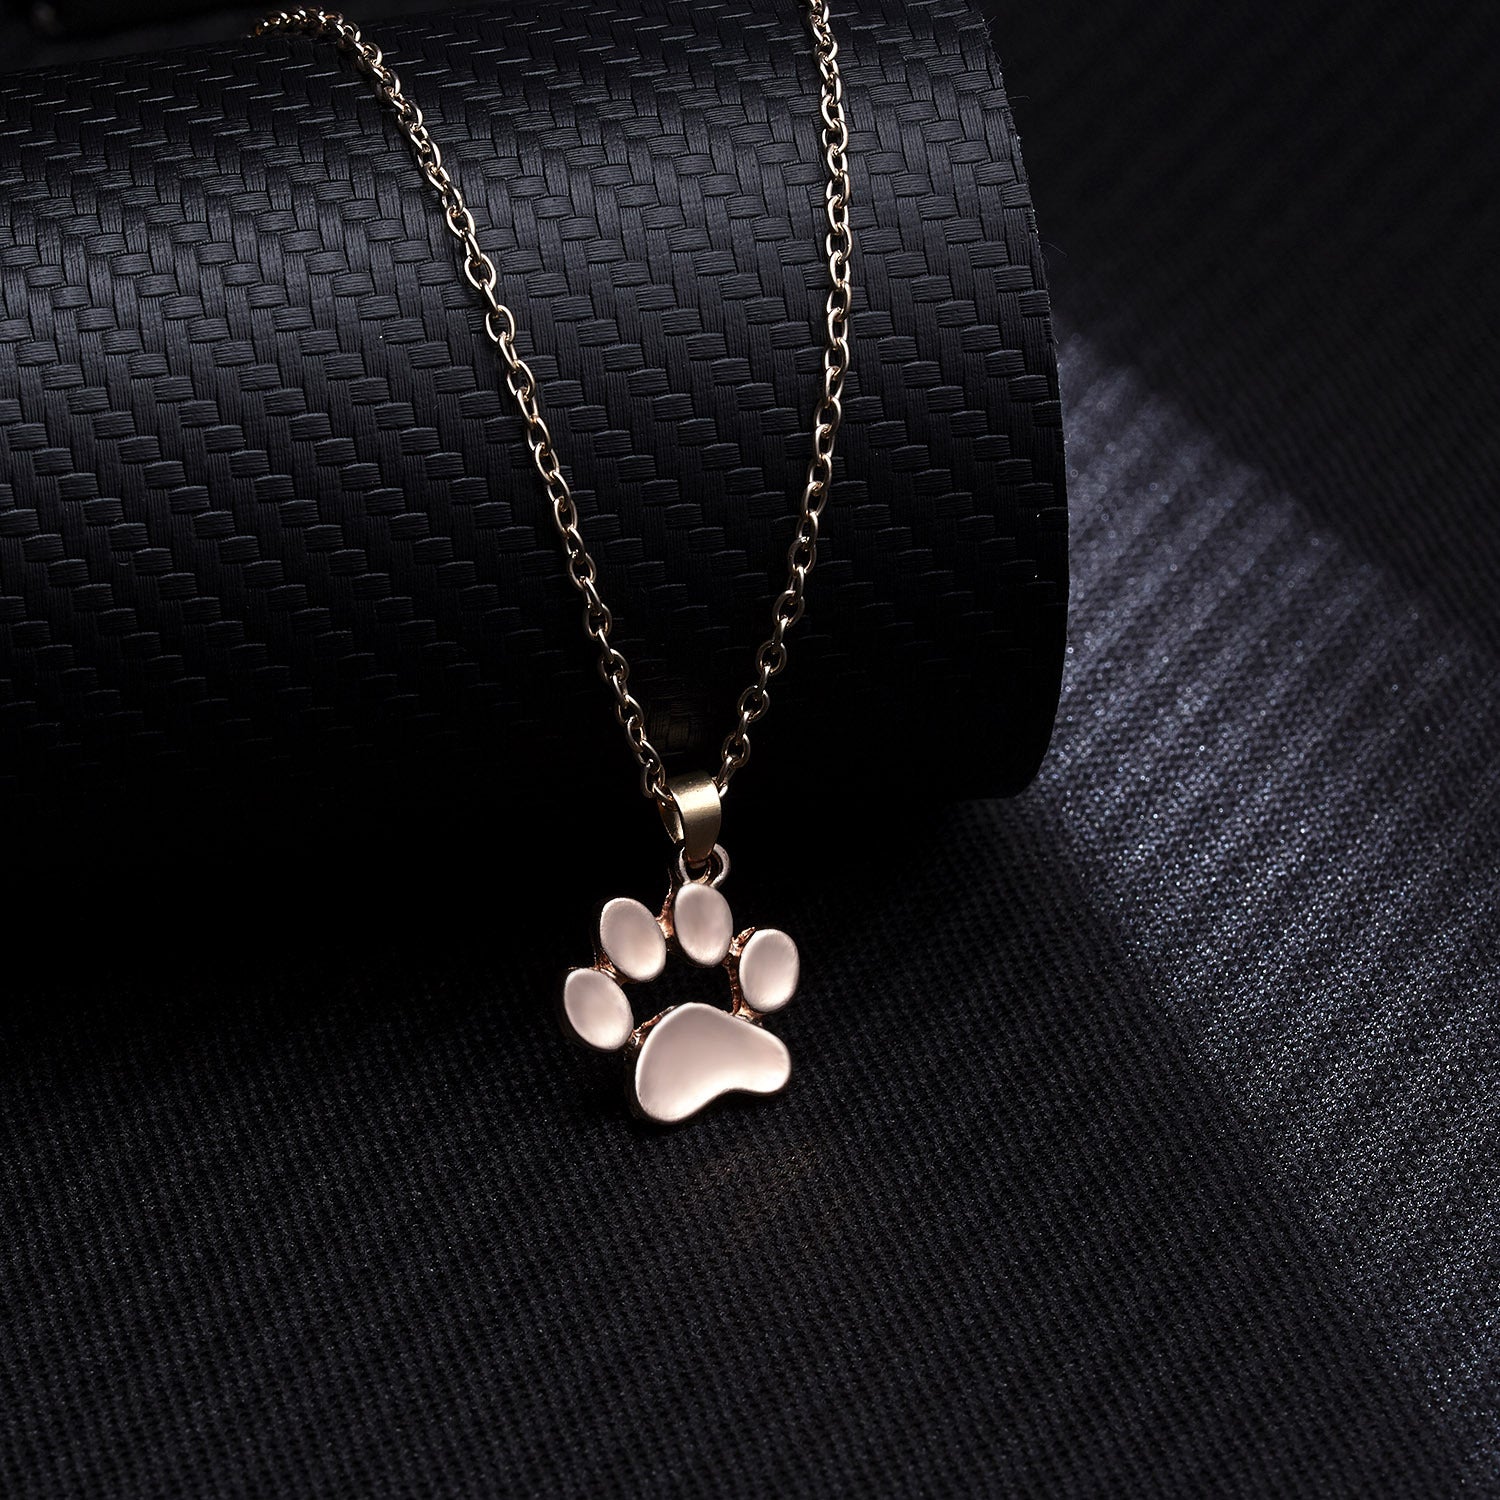 Cute Cat Paw Foot Necklace - Nekoby Cute Cat Paw Foot Necklace